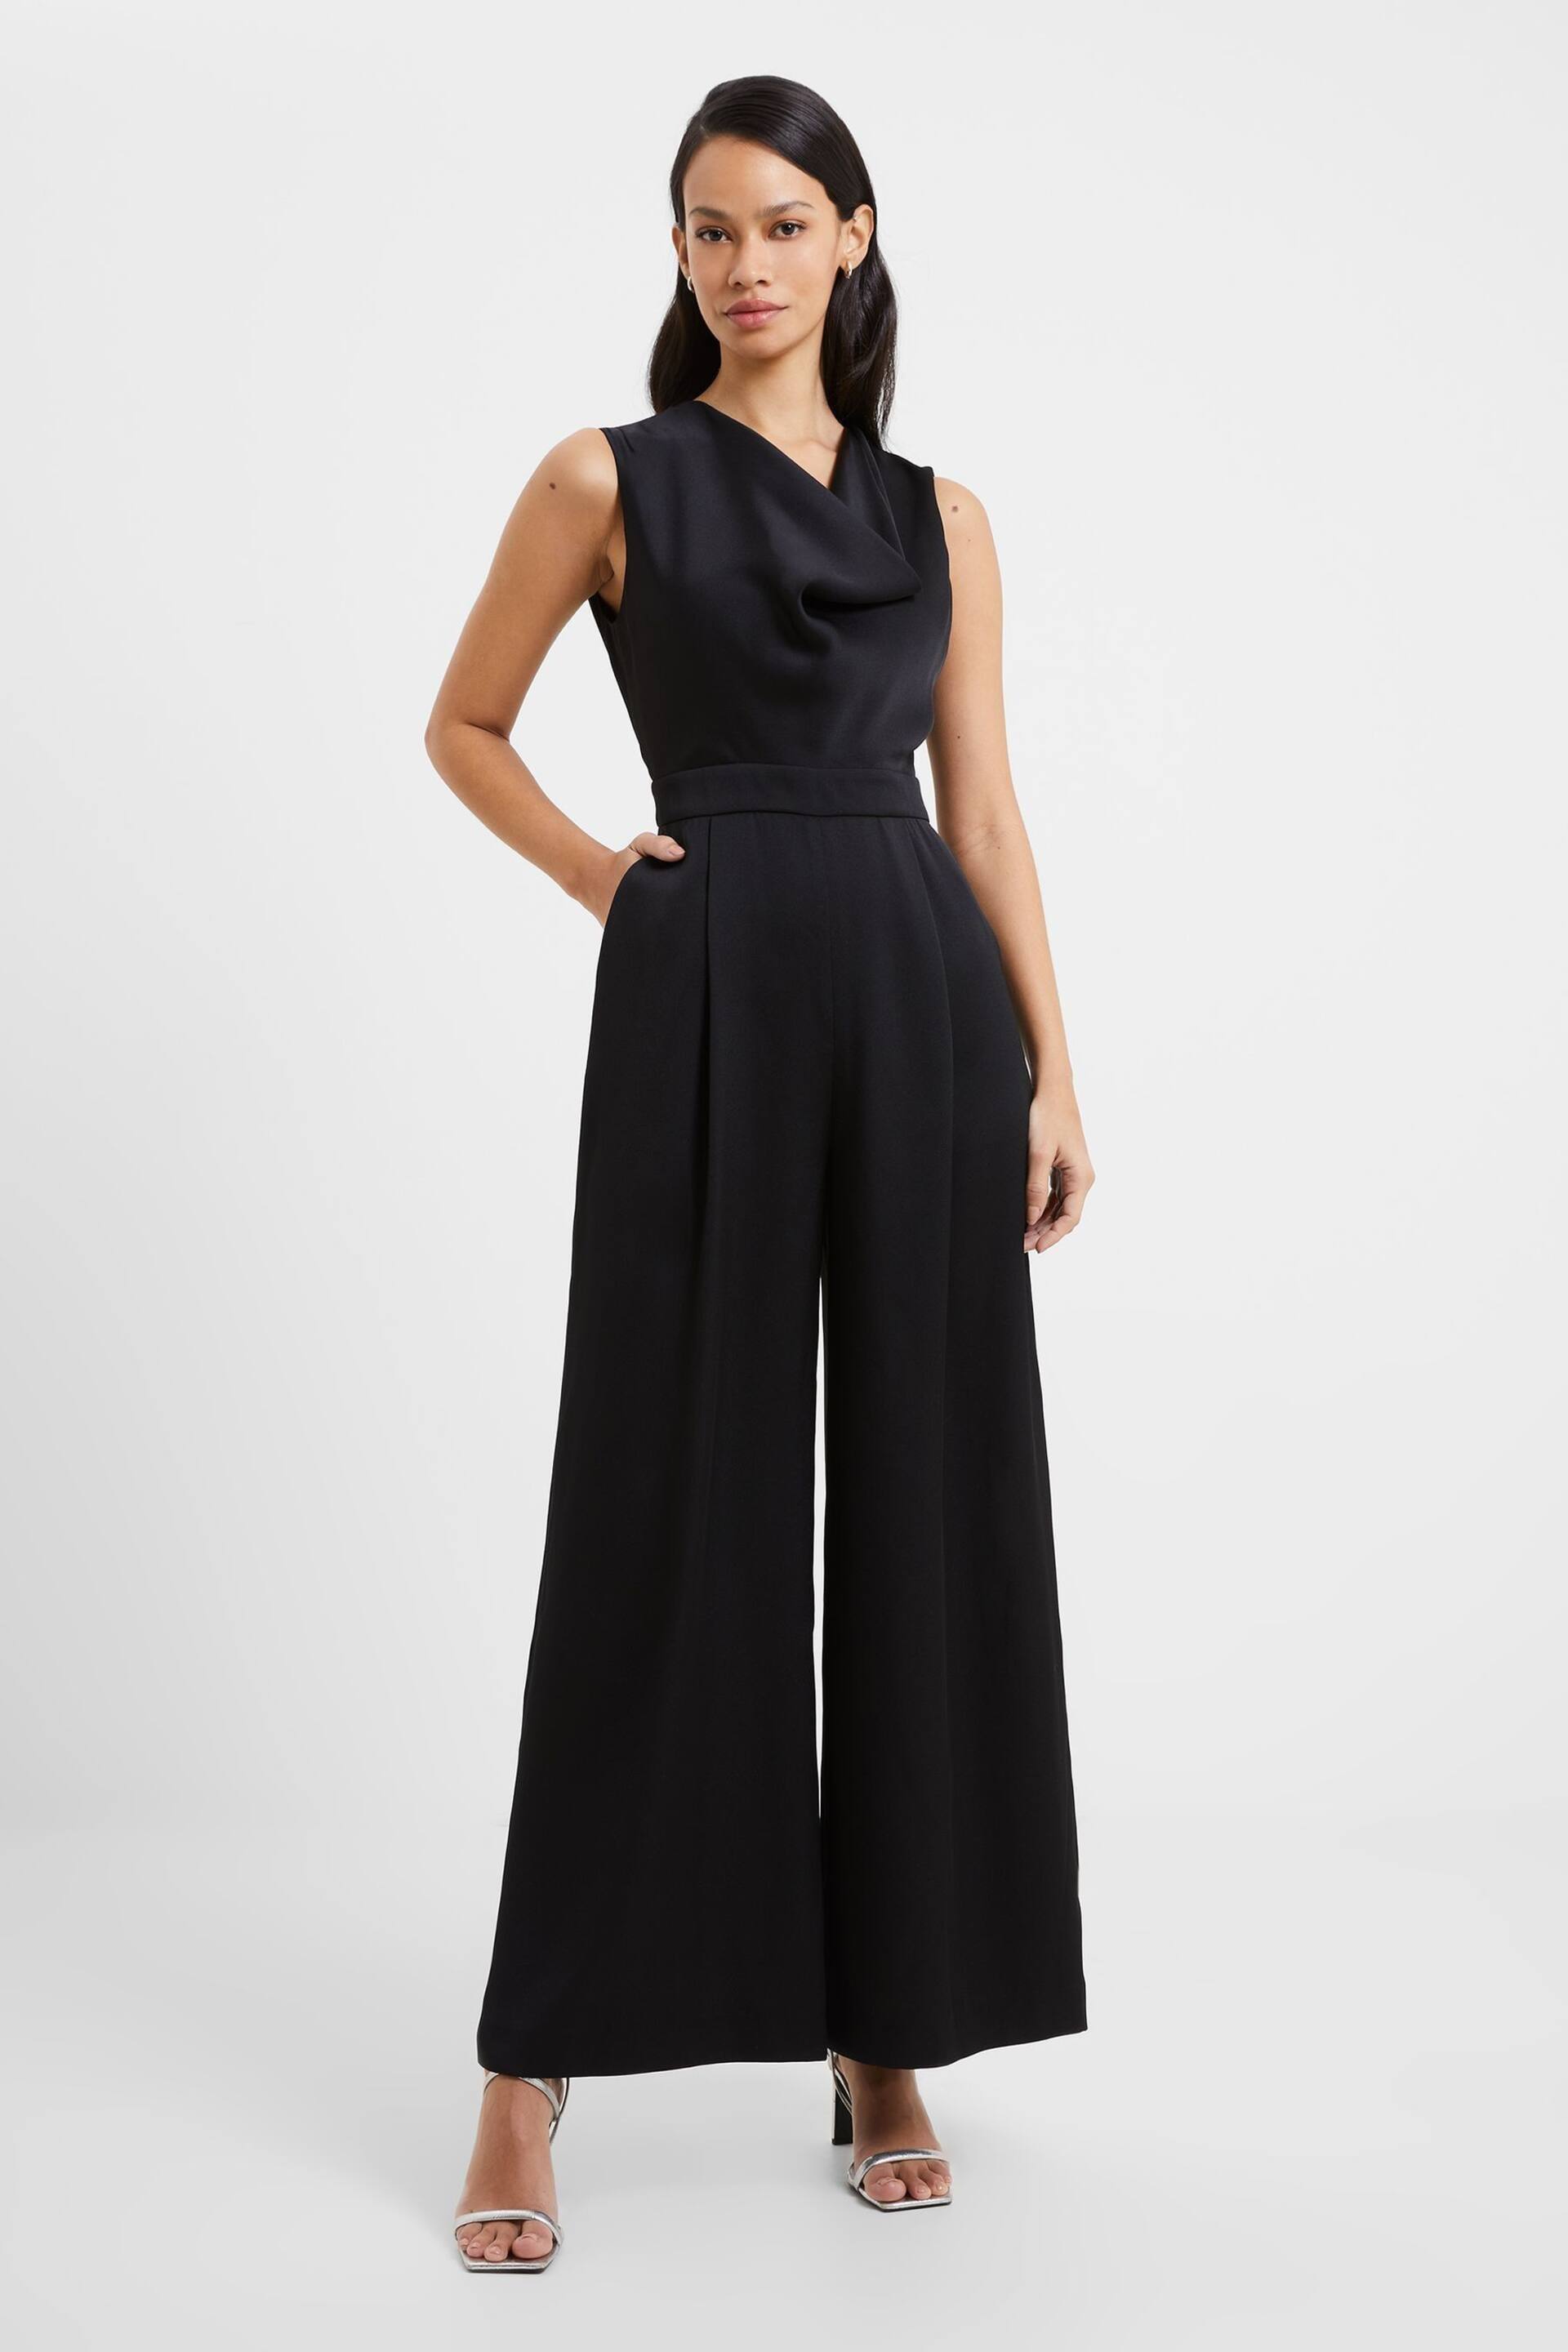 French Connection Harlow Satin Jumpsuit - Image 1 of 4